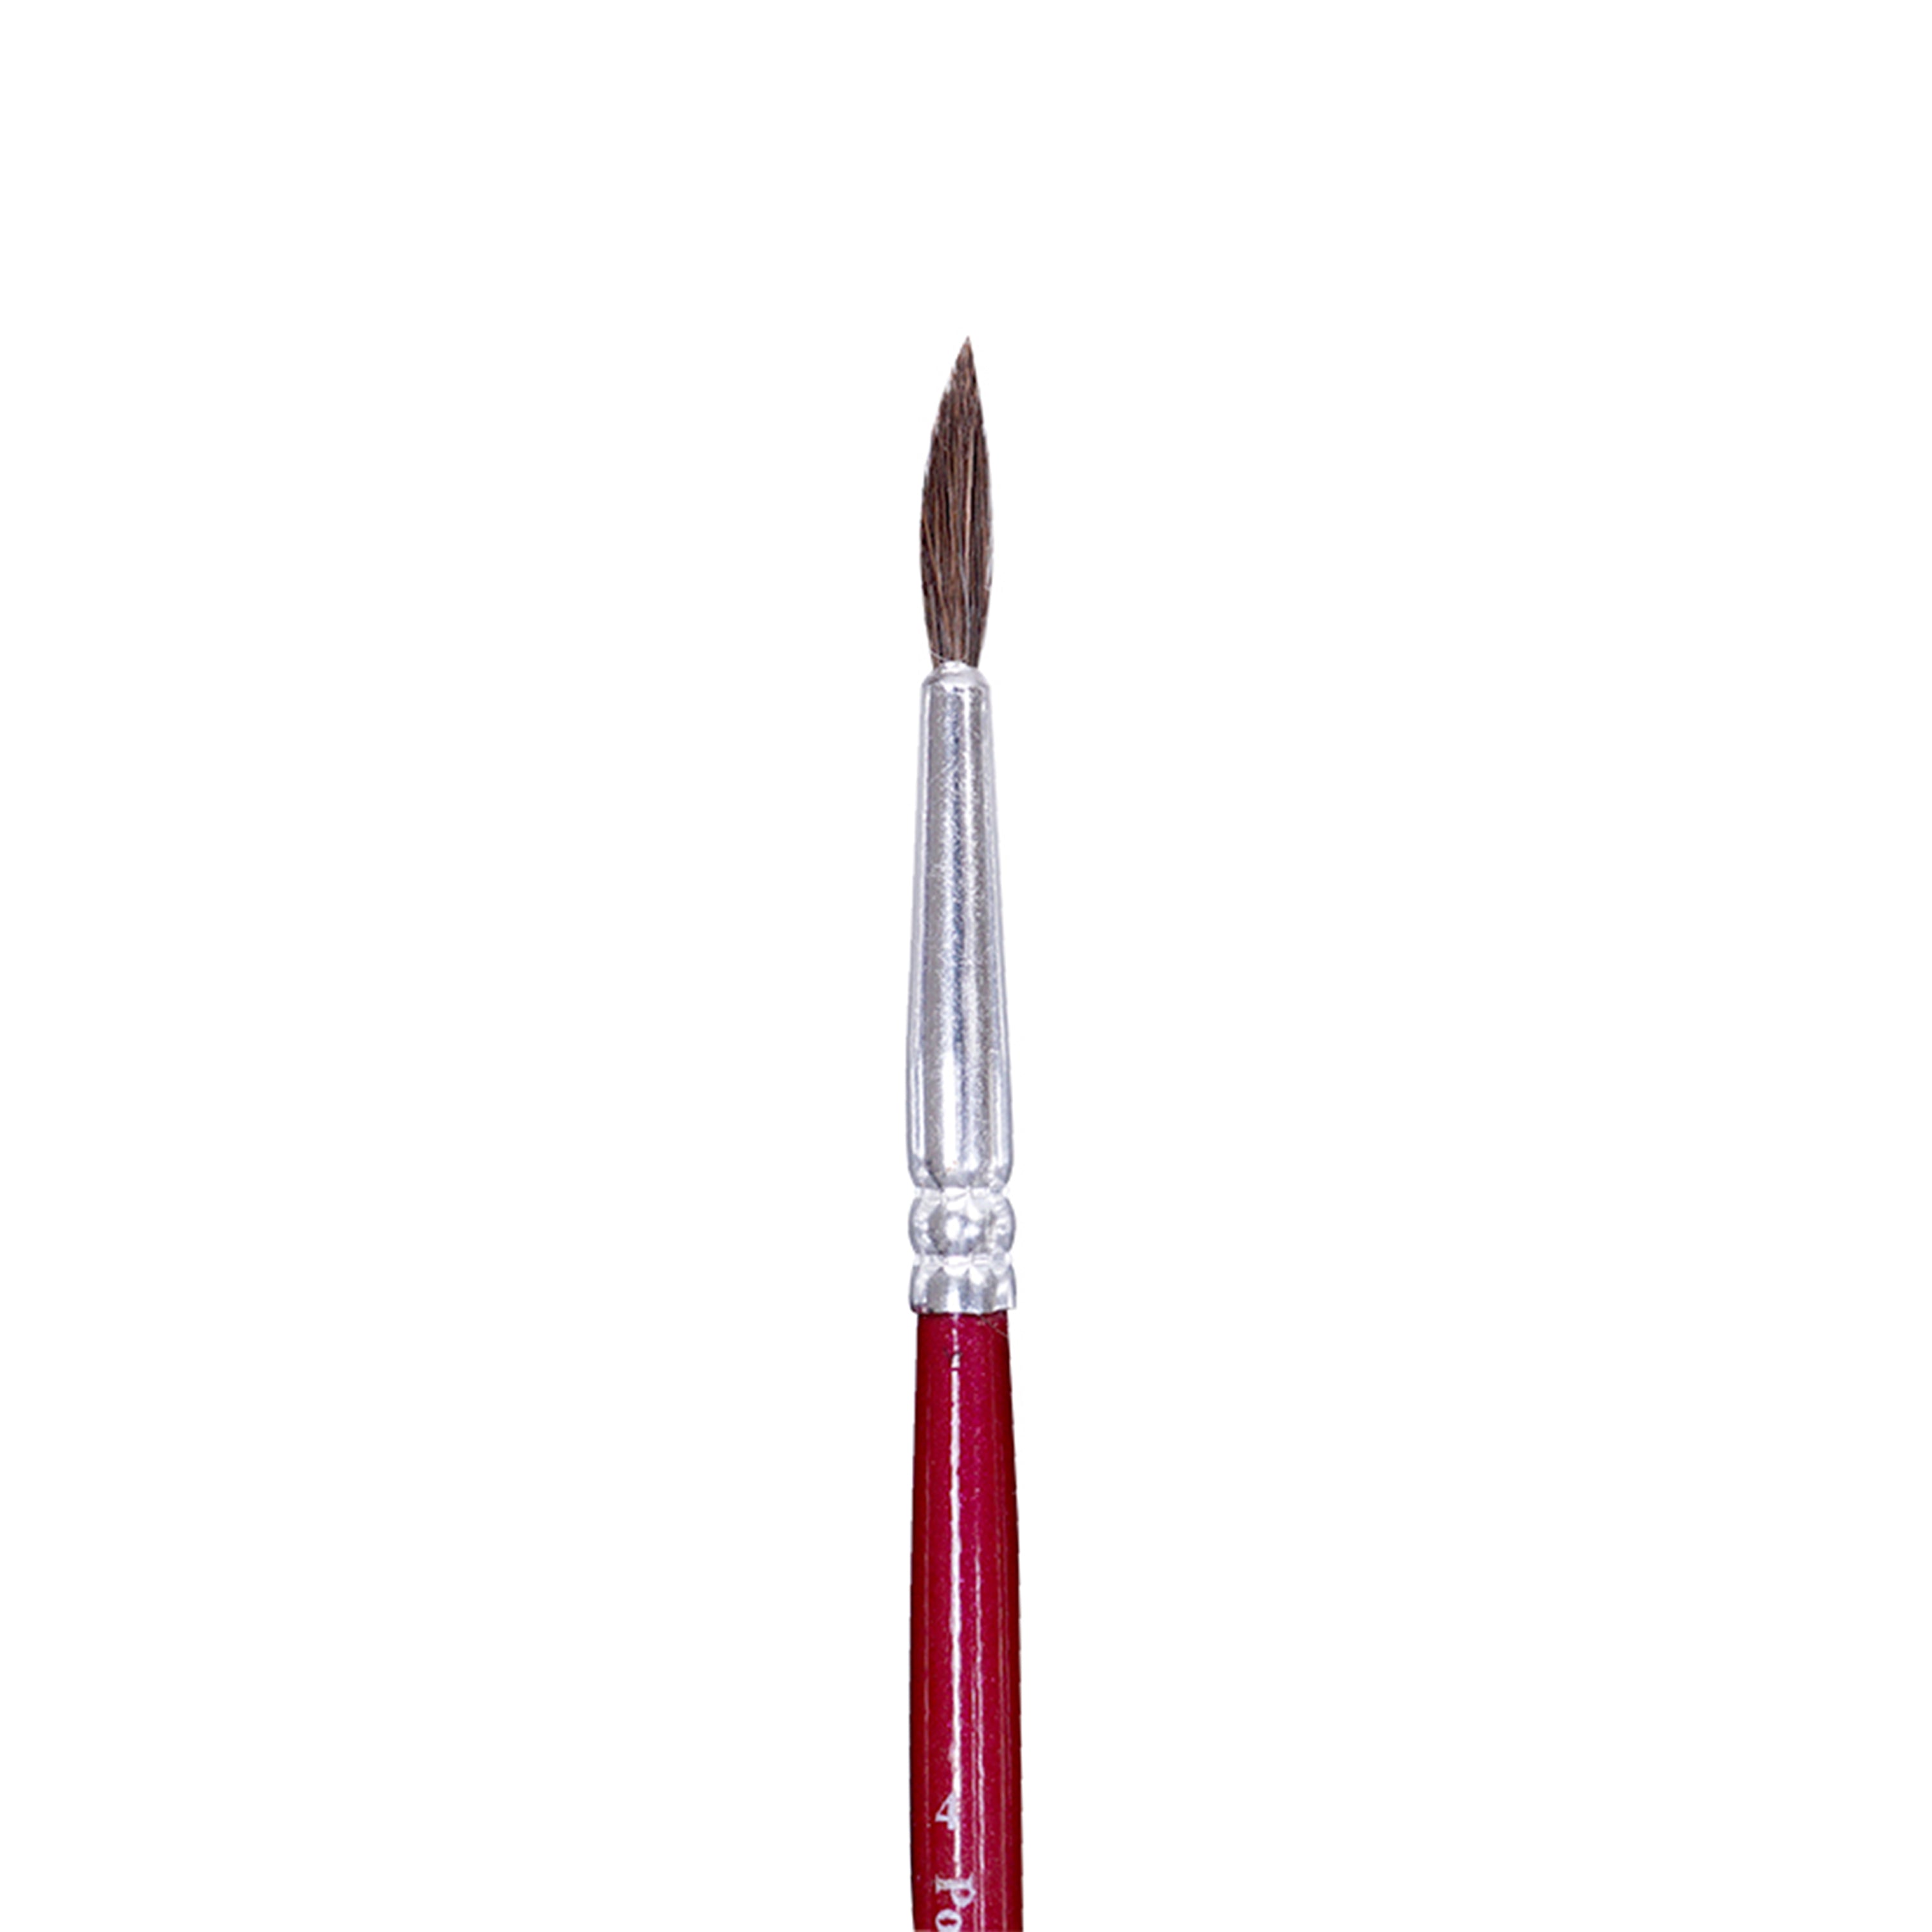 Faber Castell Paint Brush - Pony Hair Round Size 4, 1pc